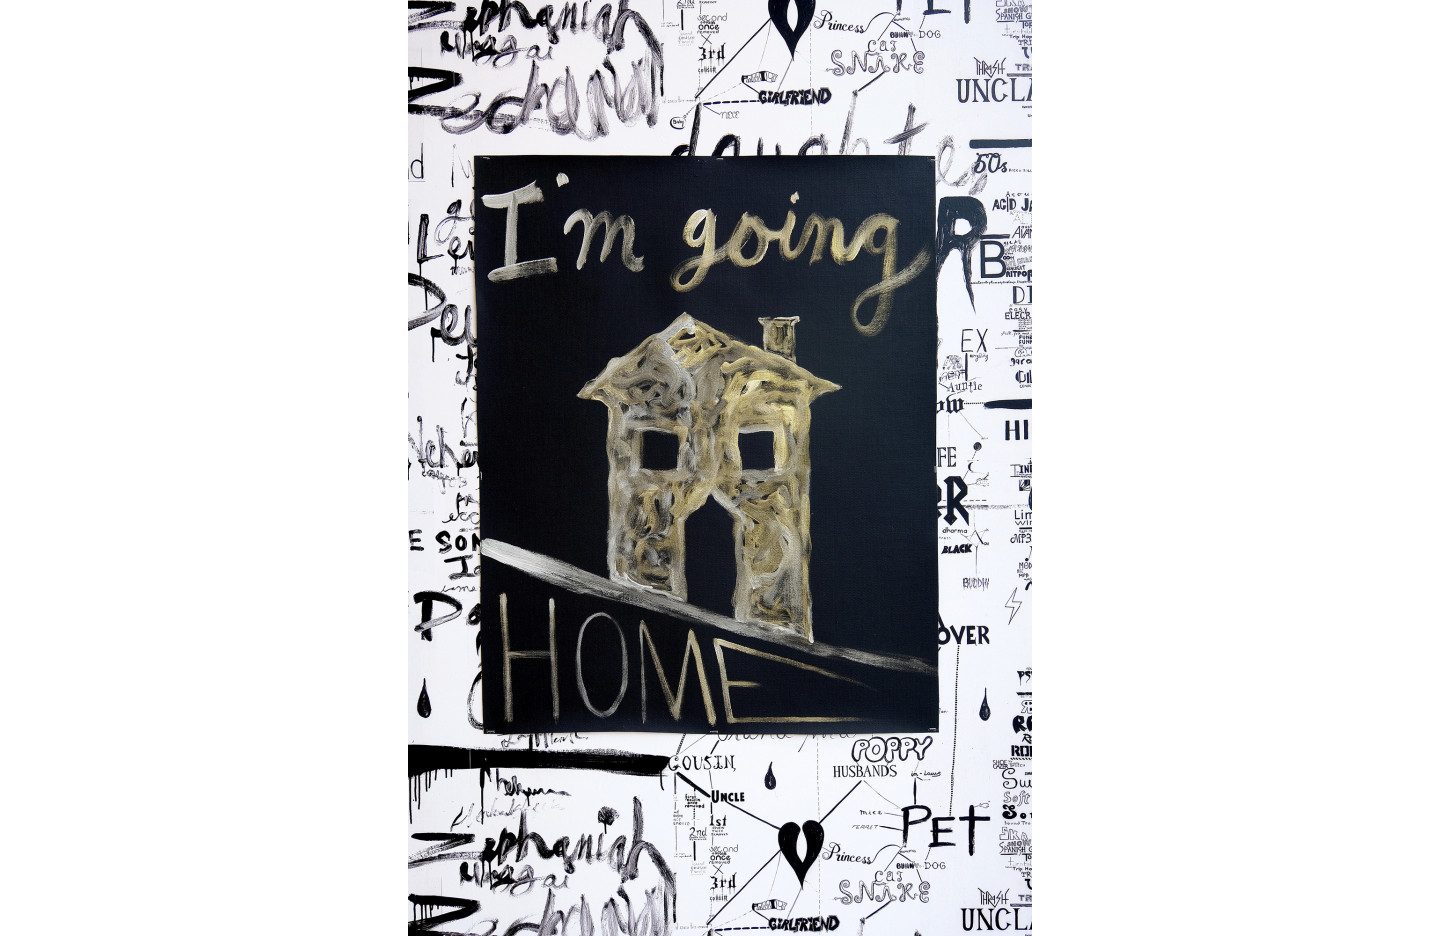 I'm going home (2017), Nell, Ramp Gallery